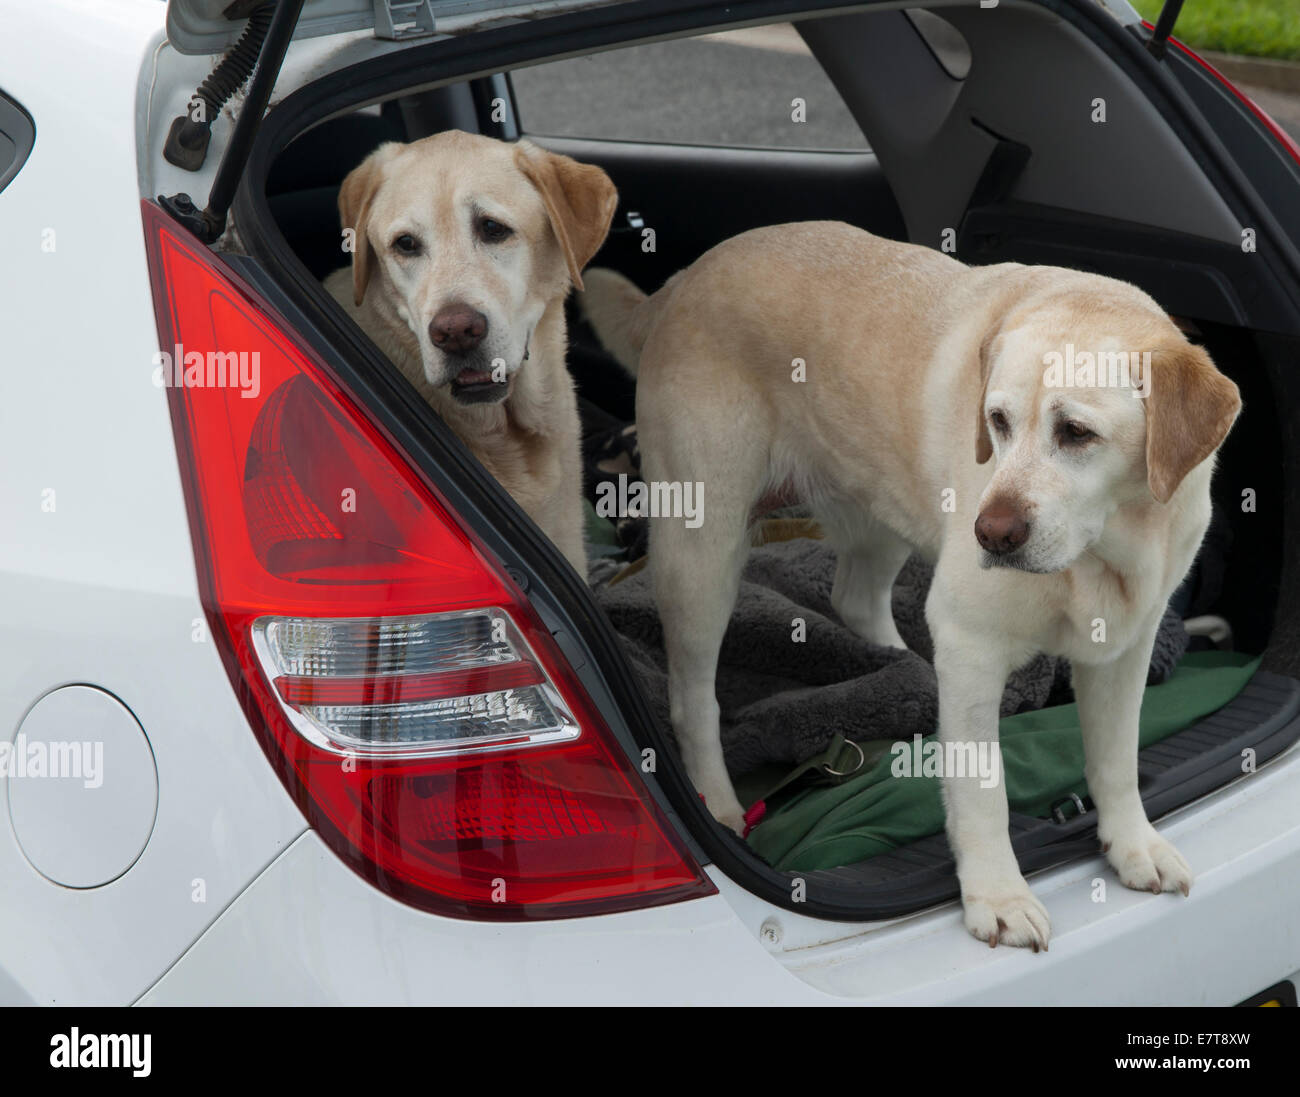 Two dogs getting out of rear of hatchback vehicle. Stock Photo